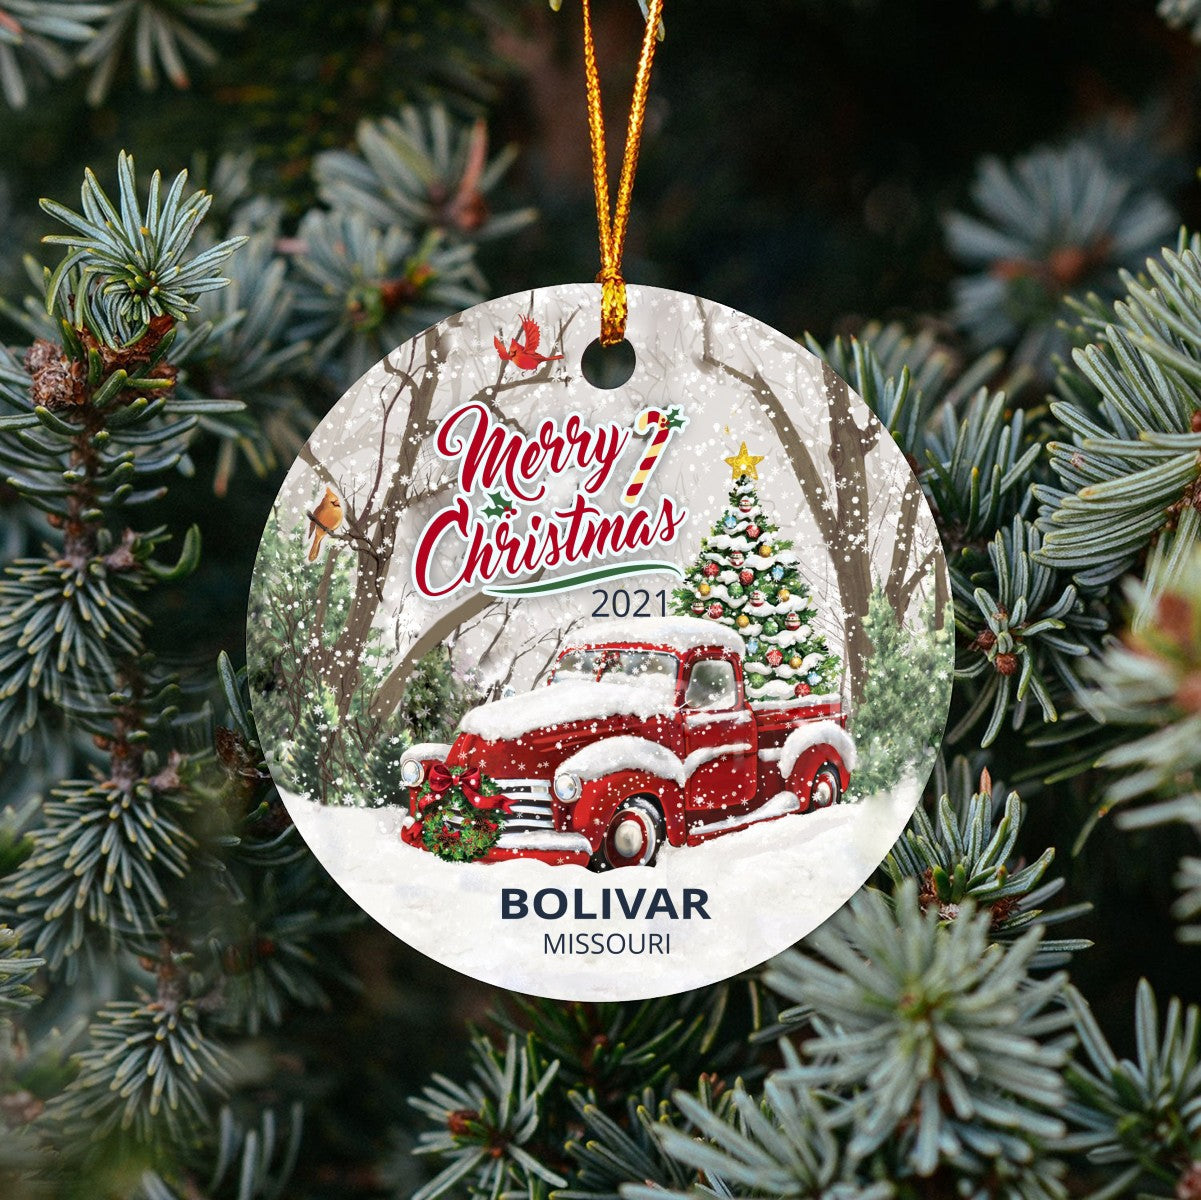 Christmas Tree Ornaments Bolivar - Ornament With Name City, State Bolivar Missouri MO Ornament - Red Truck Xmas Ornaments 3'' Plastic Gift For Family, Friend And Housewarming